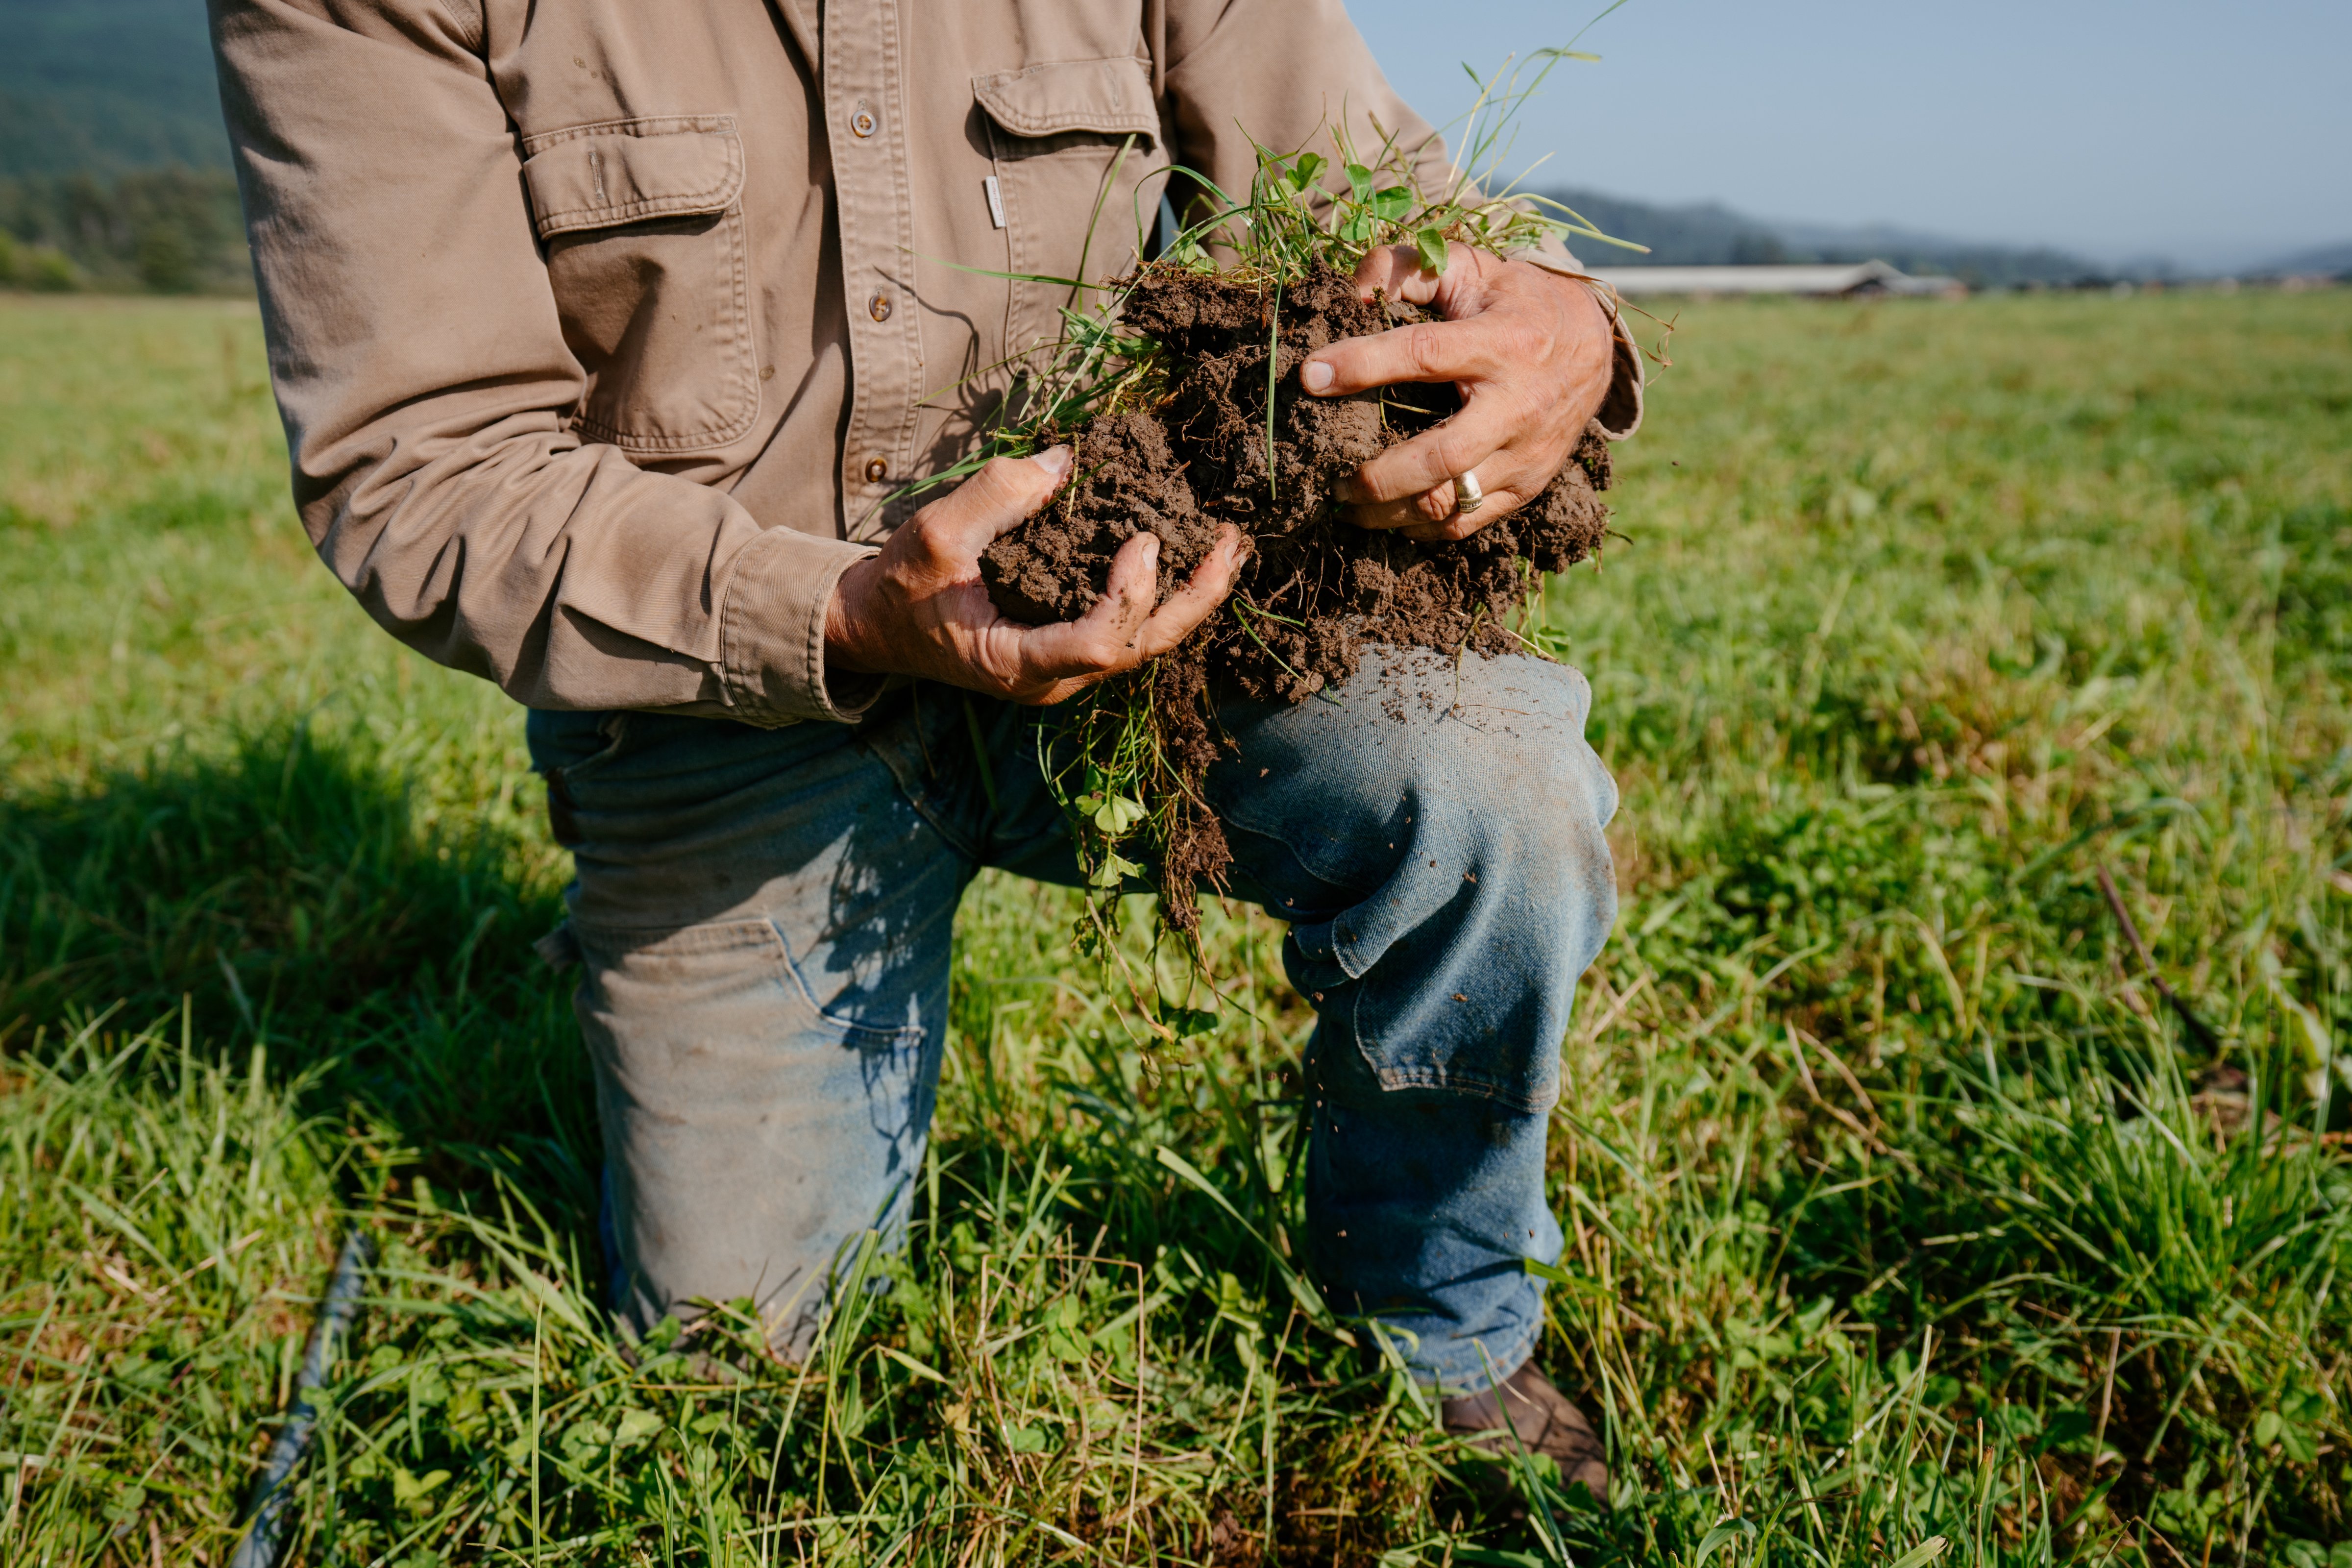 Soil with more organic matter can store more carbon dioxide. (Alexandre Family Farm, Madyline Braught Photography)